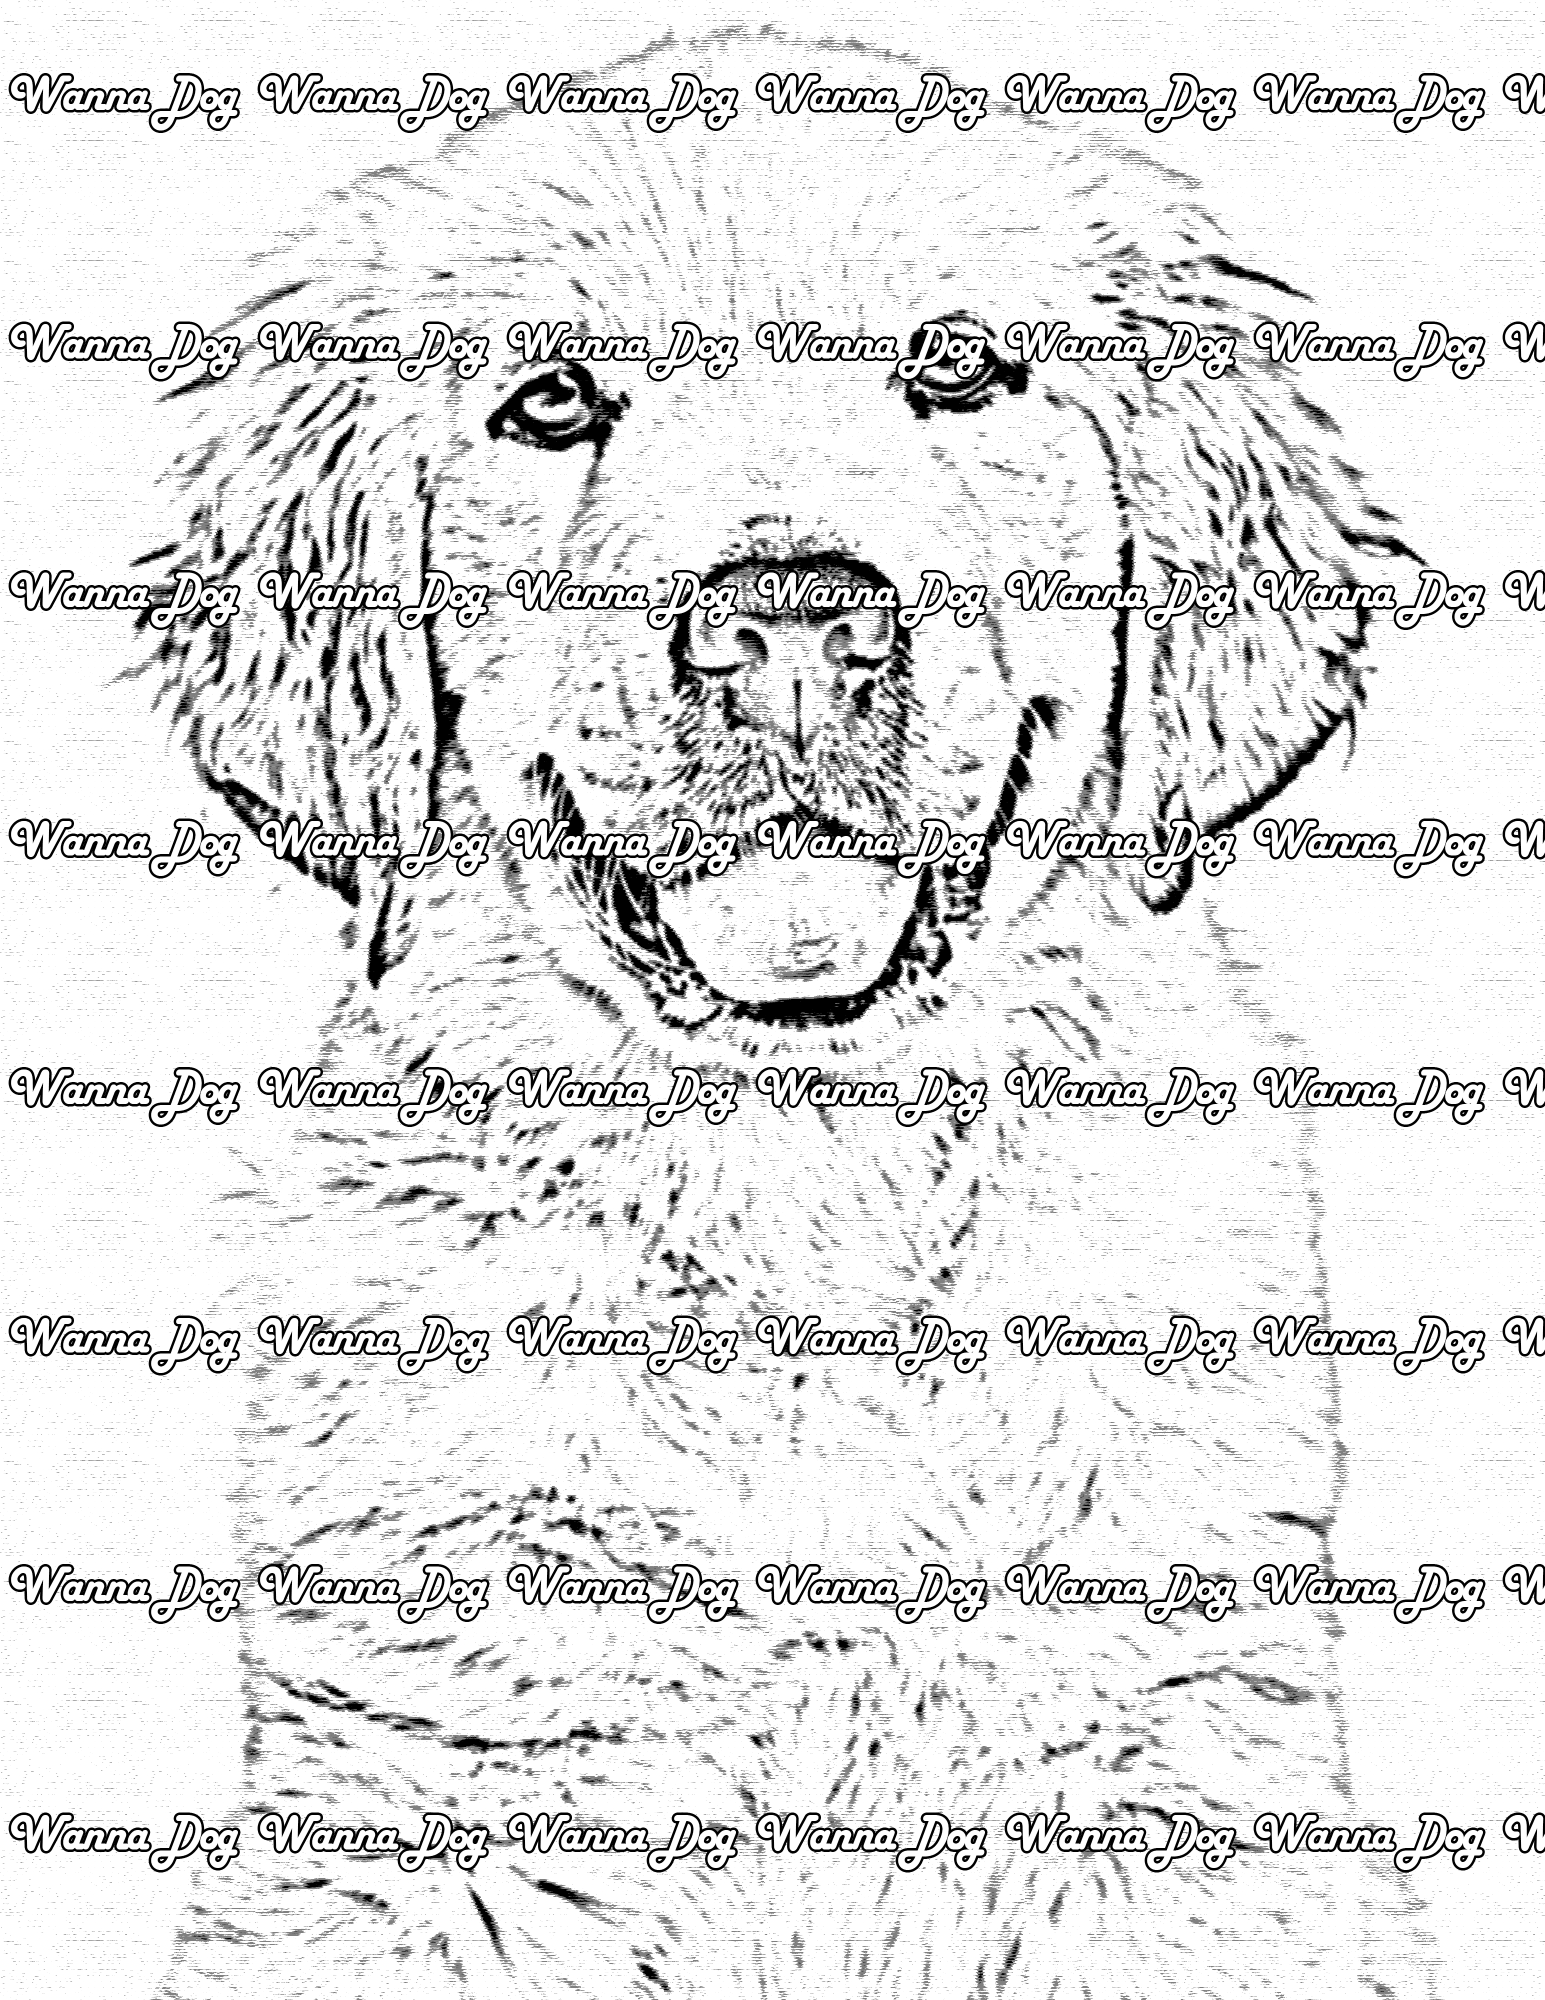 Golden Retriever Puppy Coloring Page of a Golden Retriever Puppy smiling and posing